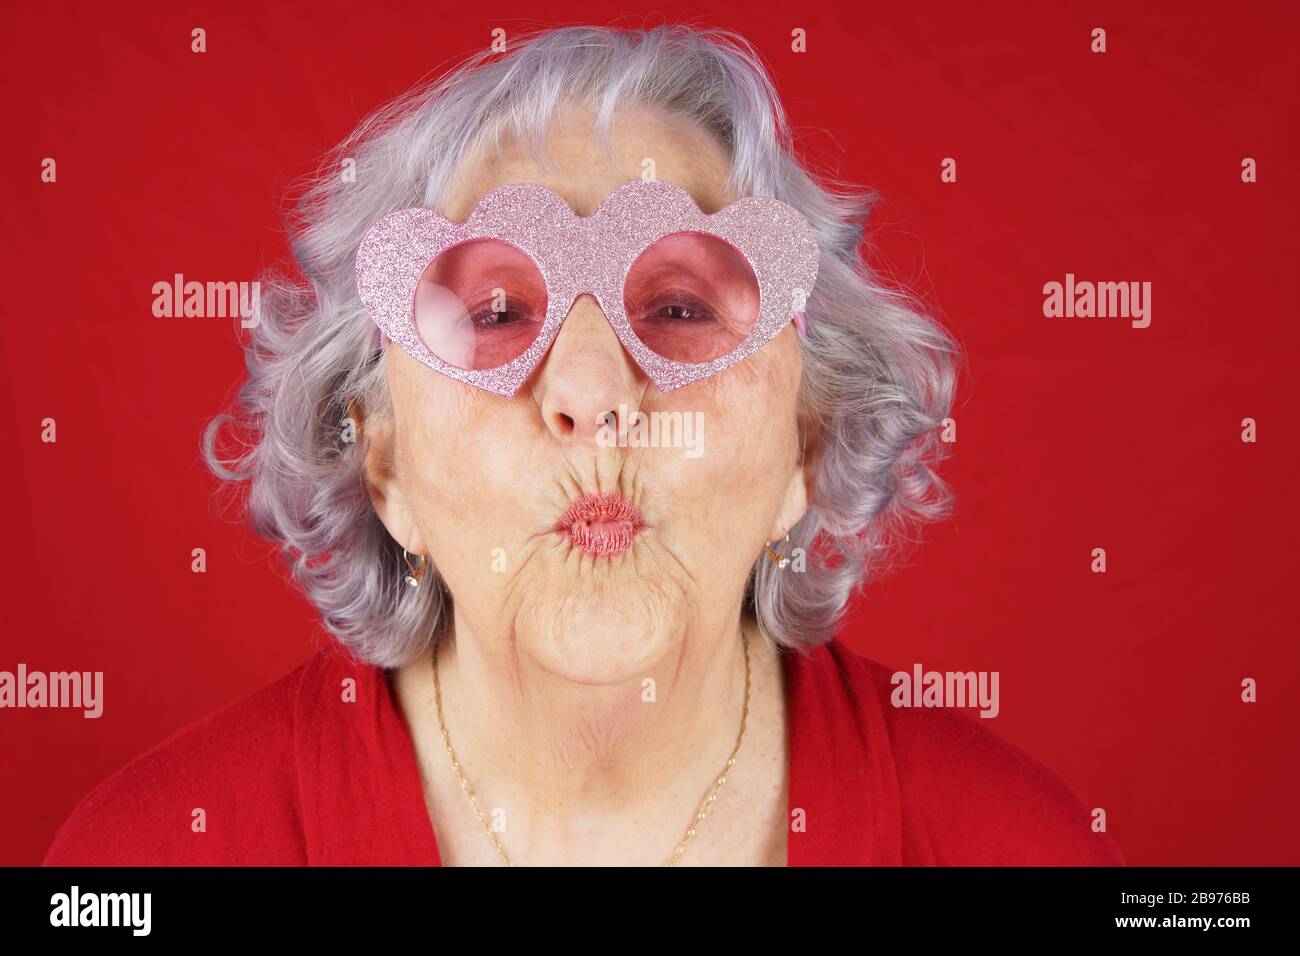 Comical granny with heart shape glasses blowing kiss Stock Photo